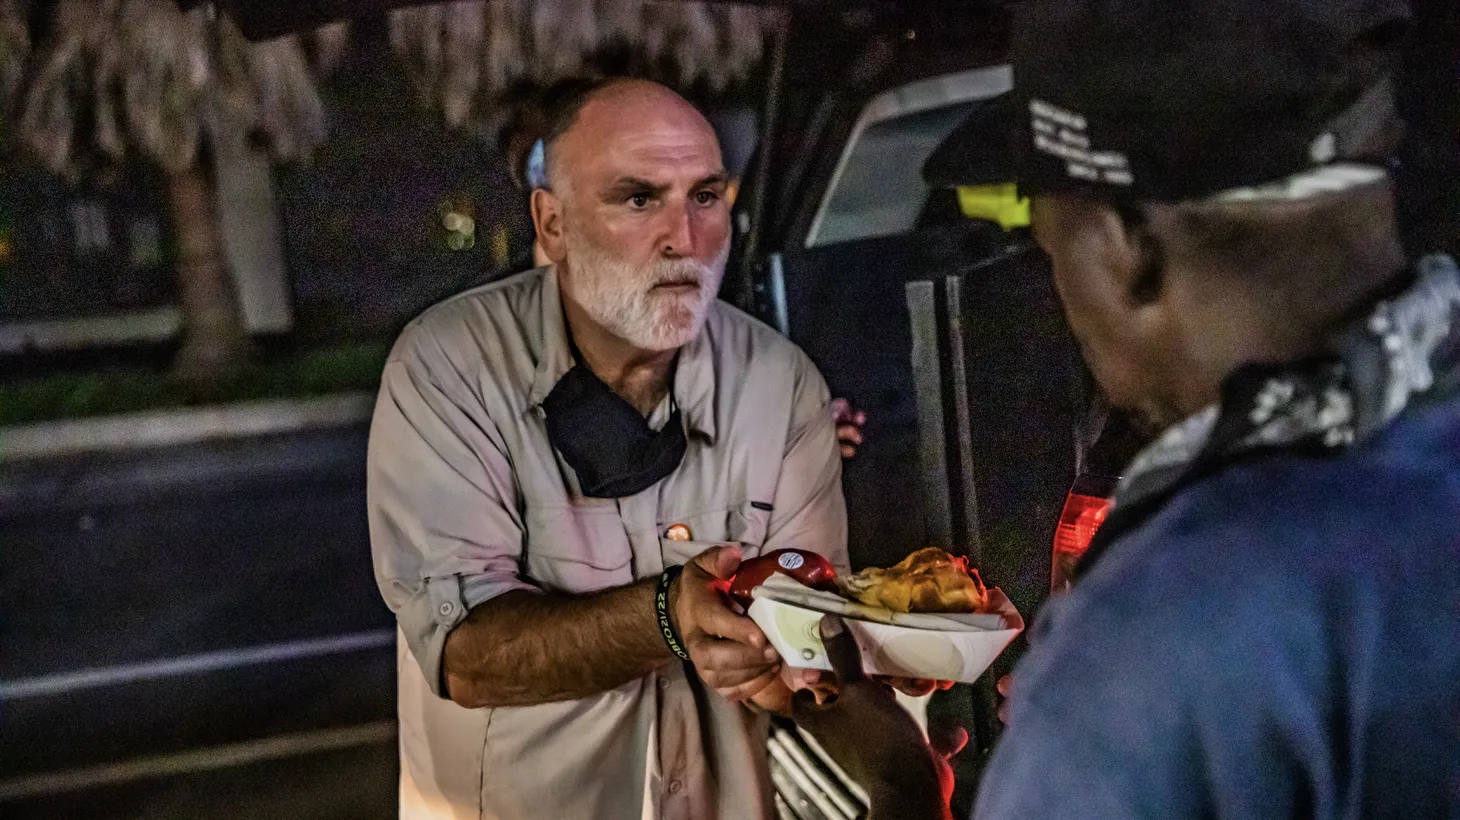 José Andrés hands out food in New Orleans as part of World Central Kitchen, the non-profit organization he founded in 2010.